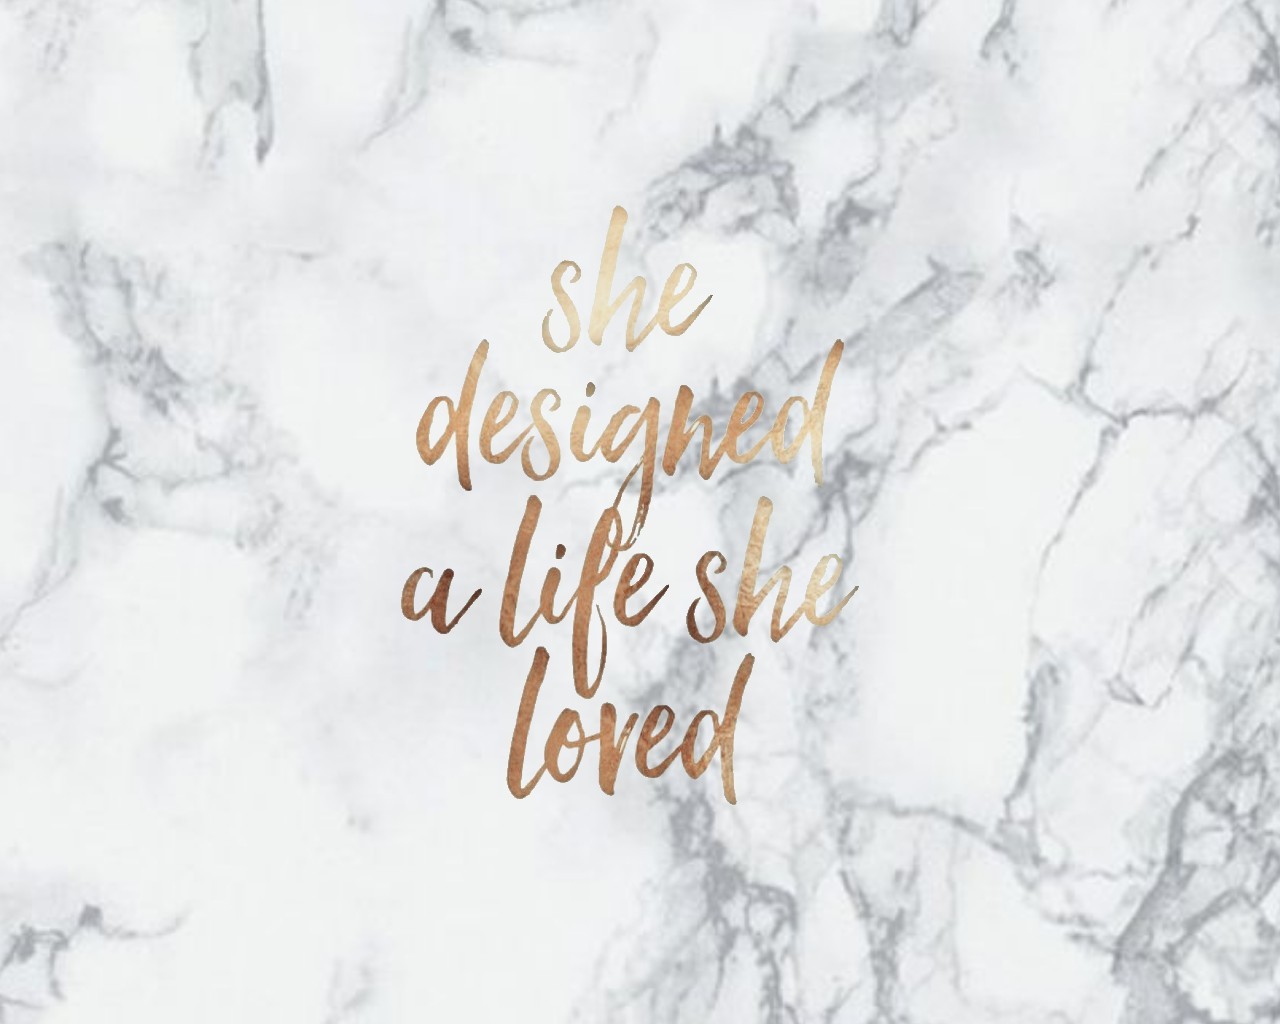 Marble quotes gold - Image by PMcG